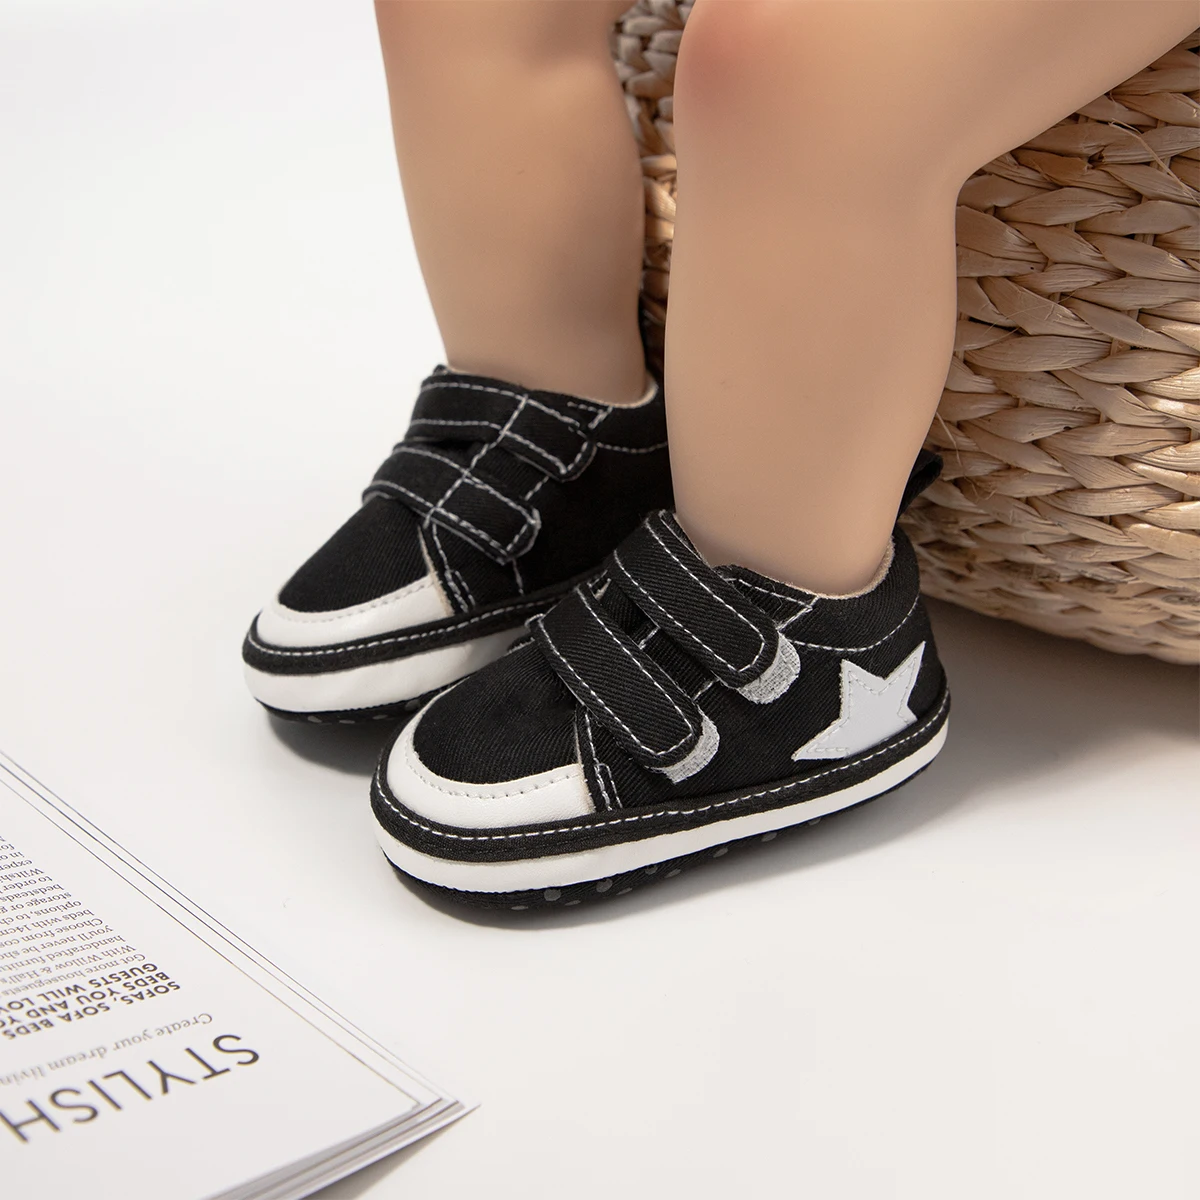 MOQ 12 Fancy Baby Casual Boy Shoes Baby Sneakers Soft Sole Anti-slip Breathable Organic Baby Shoes